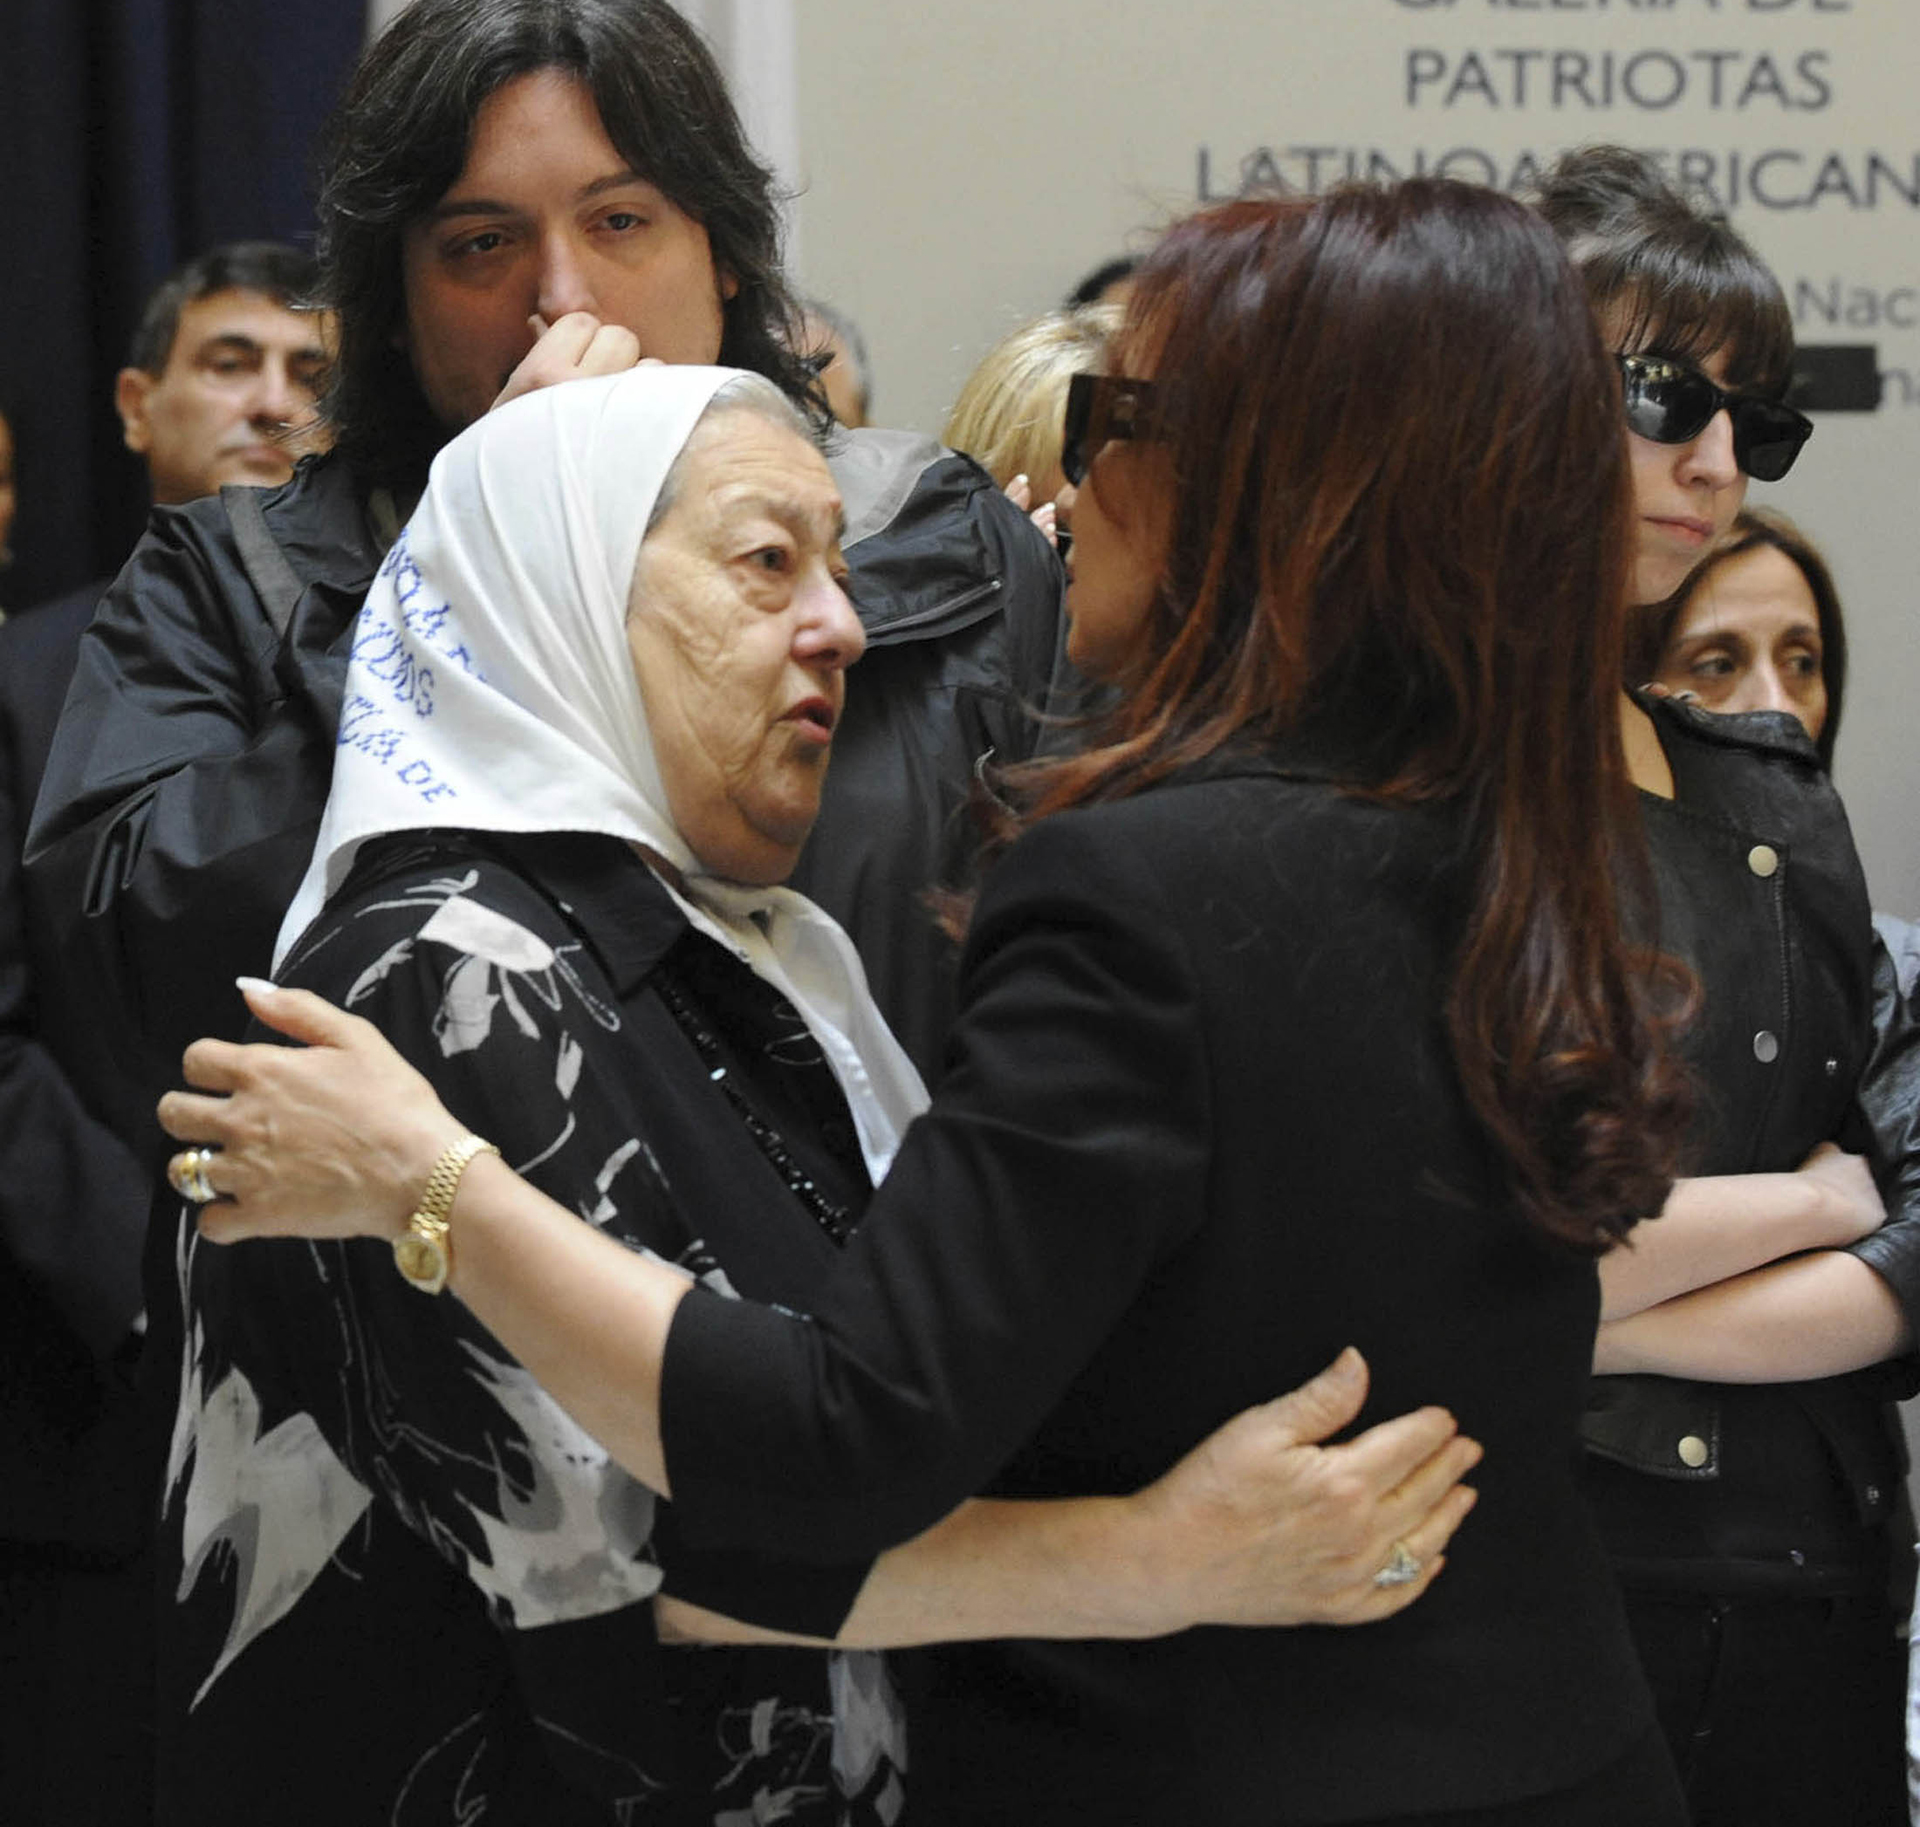 The president of the Association of Mothers of Plaza de Mazo with the vice president at the wake of Néstor Kirchner (Reuters)